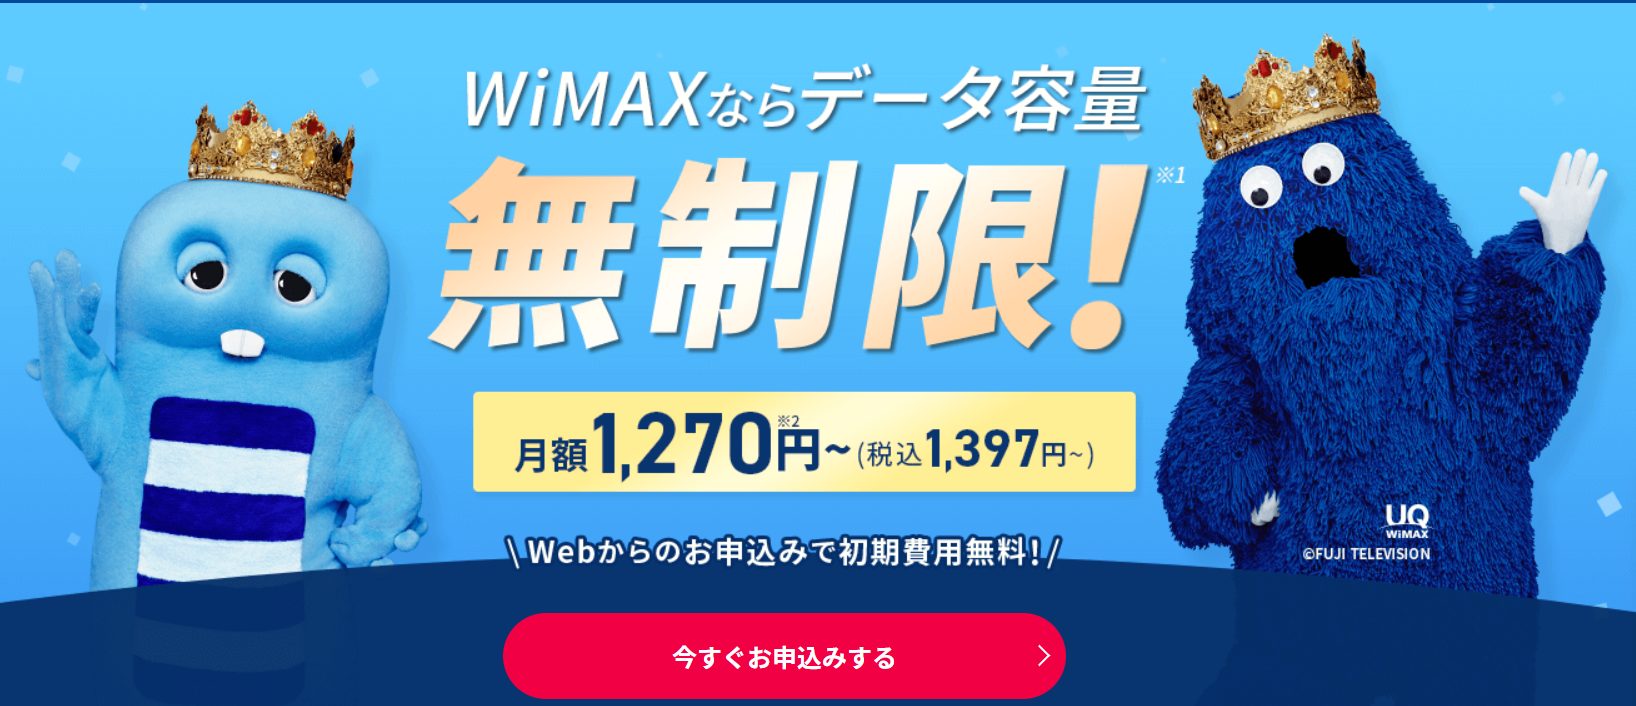 Broad WiMAX　新バナー